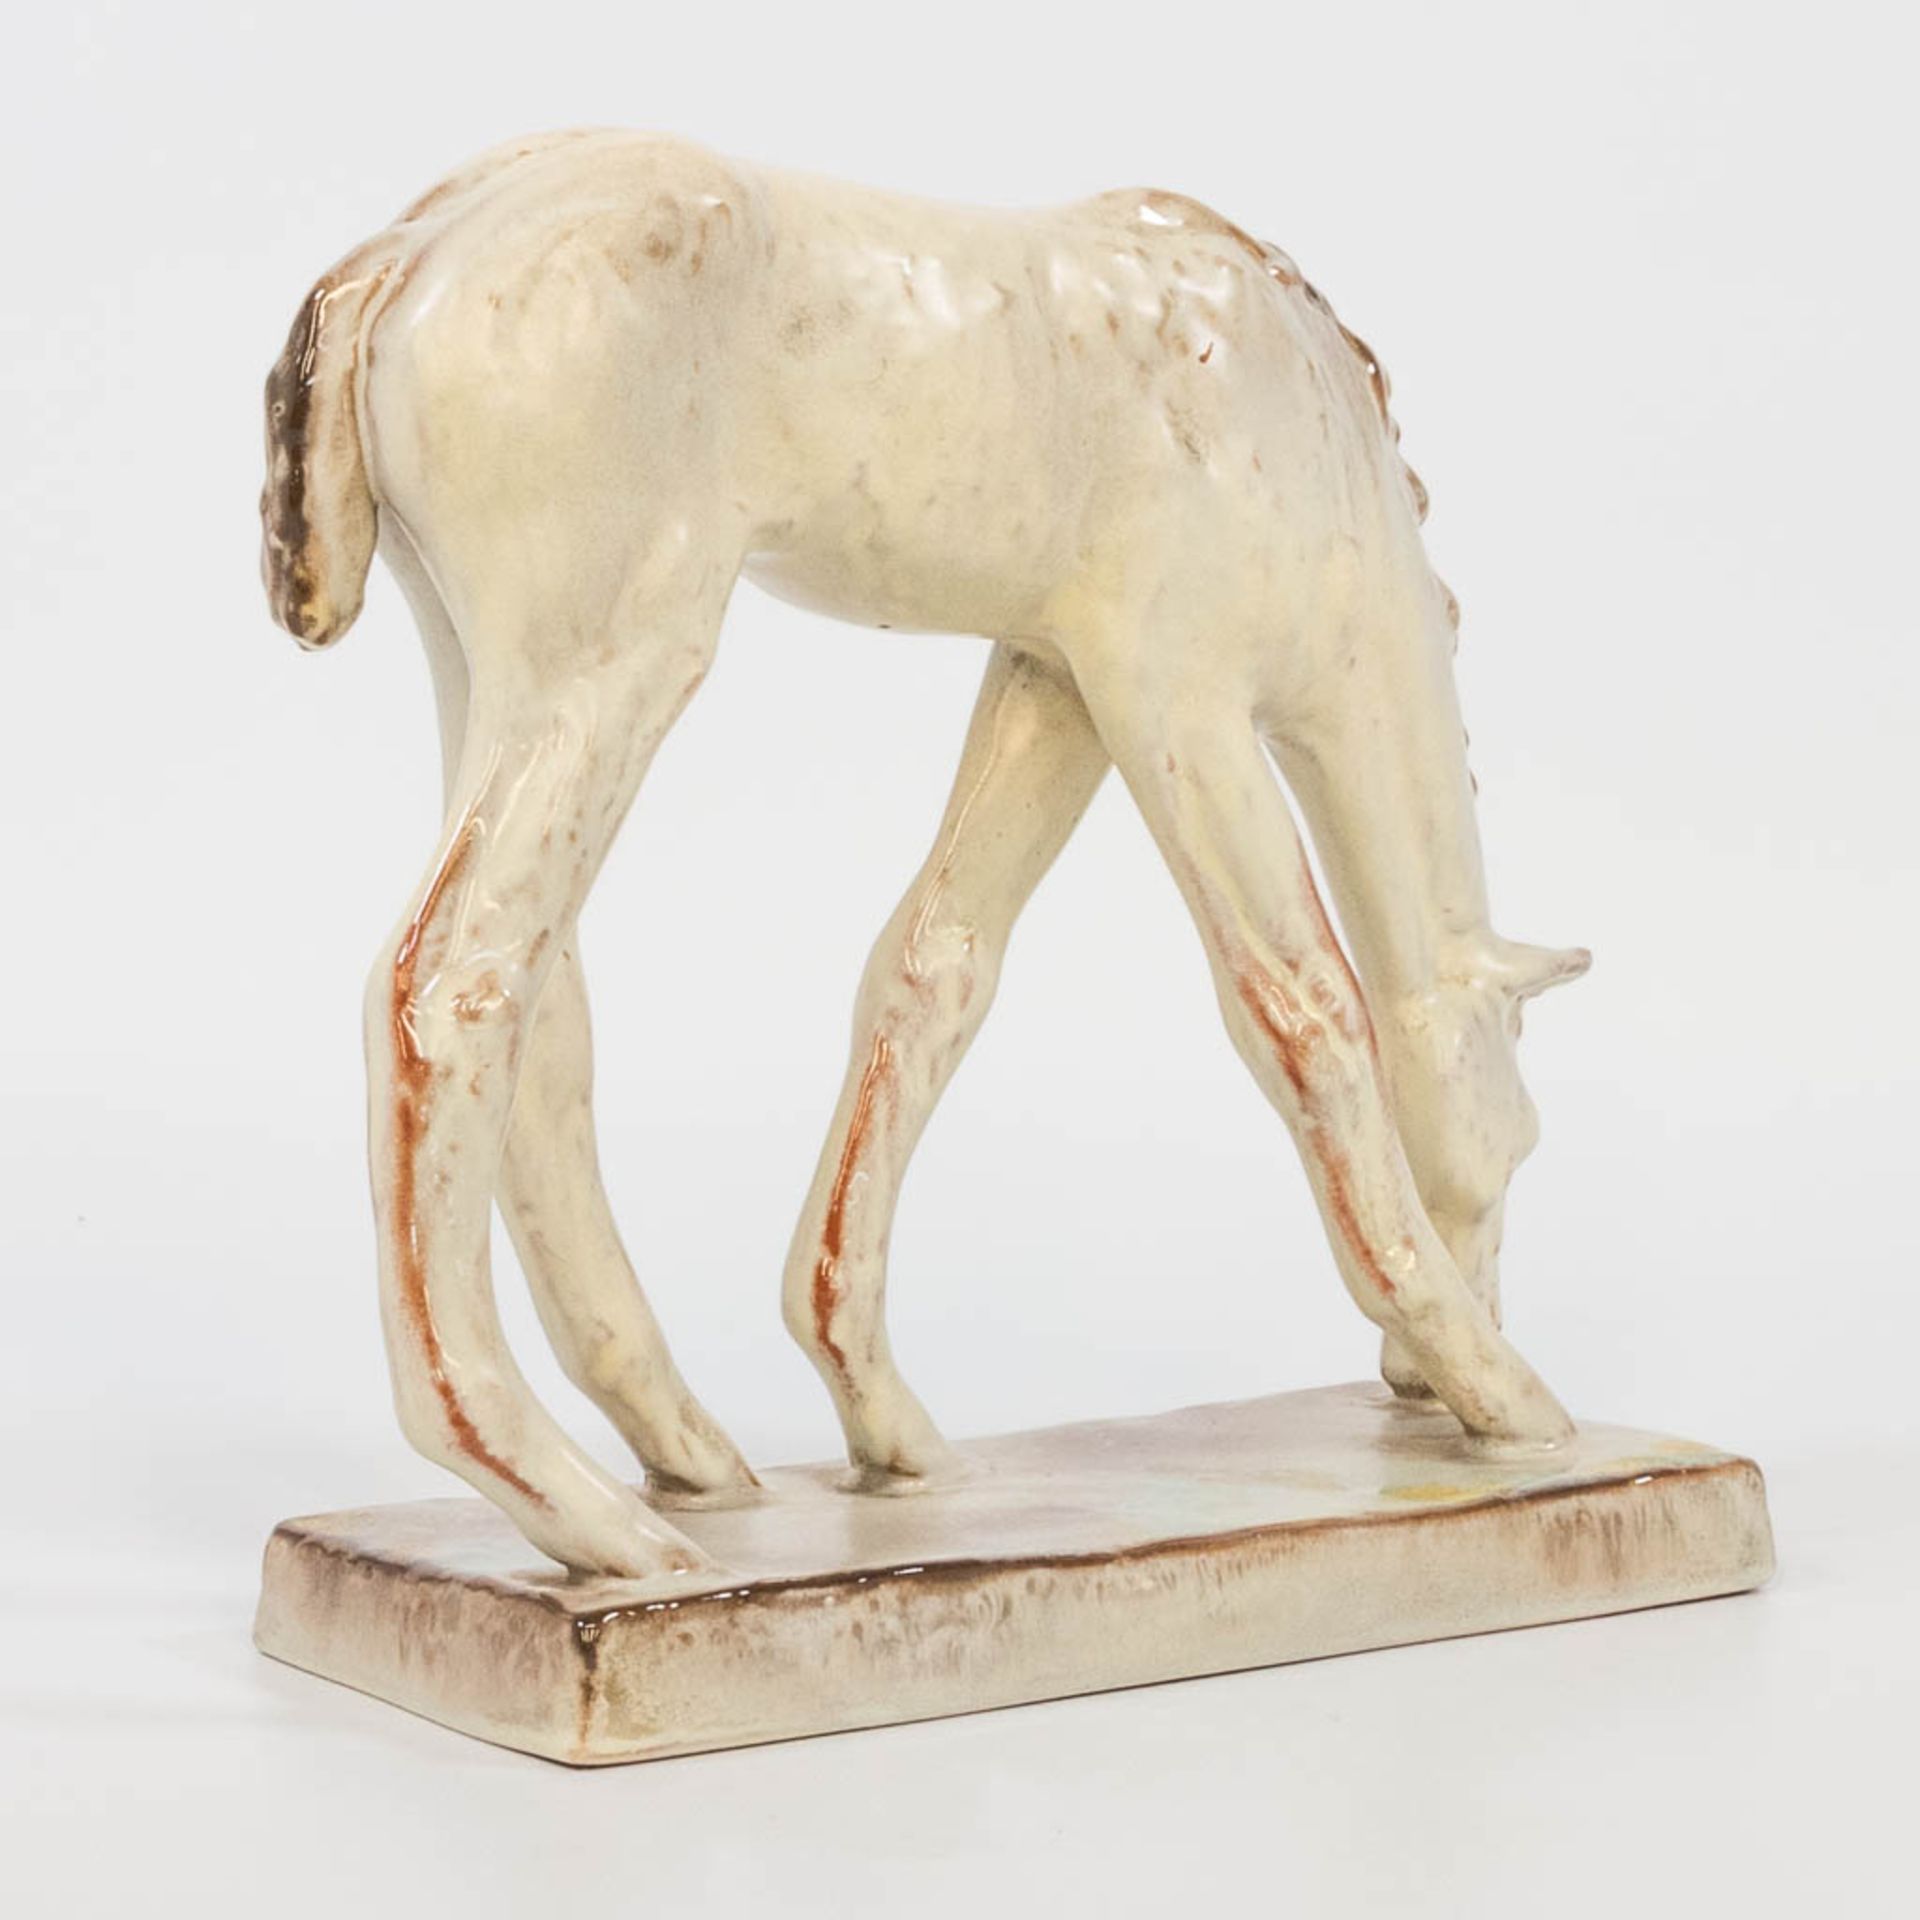 Else BACH (1899-1950) for Karlsruhe Majolica, a statue of a horse. (9 x 23 x 21,5 cm) - Image 5 of 16